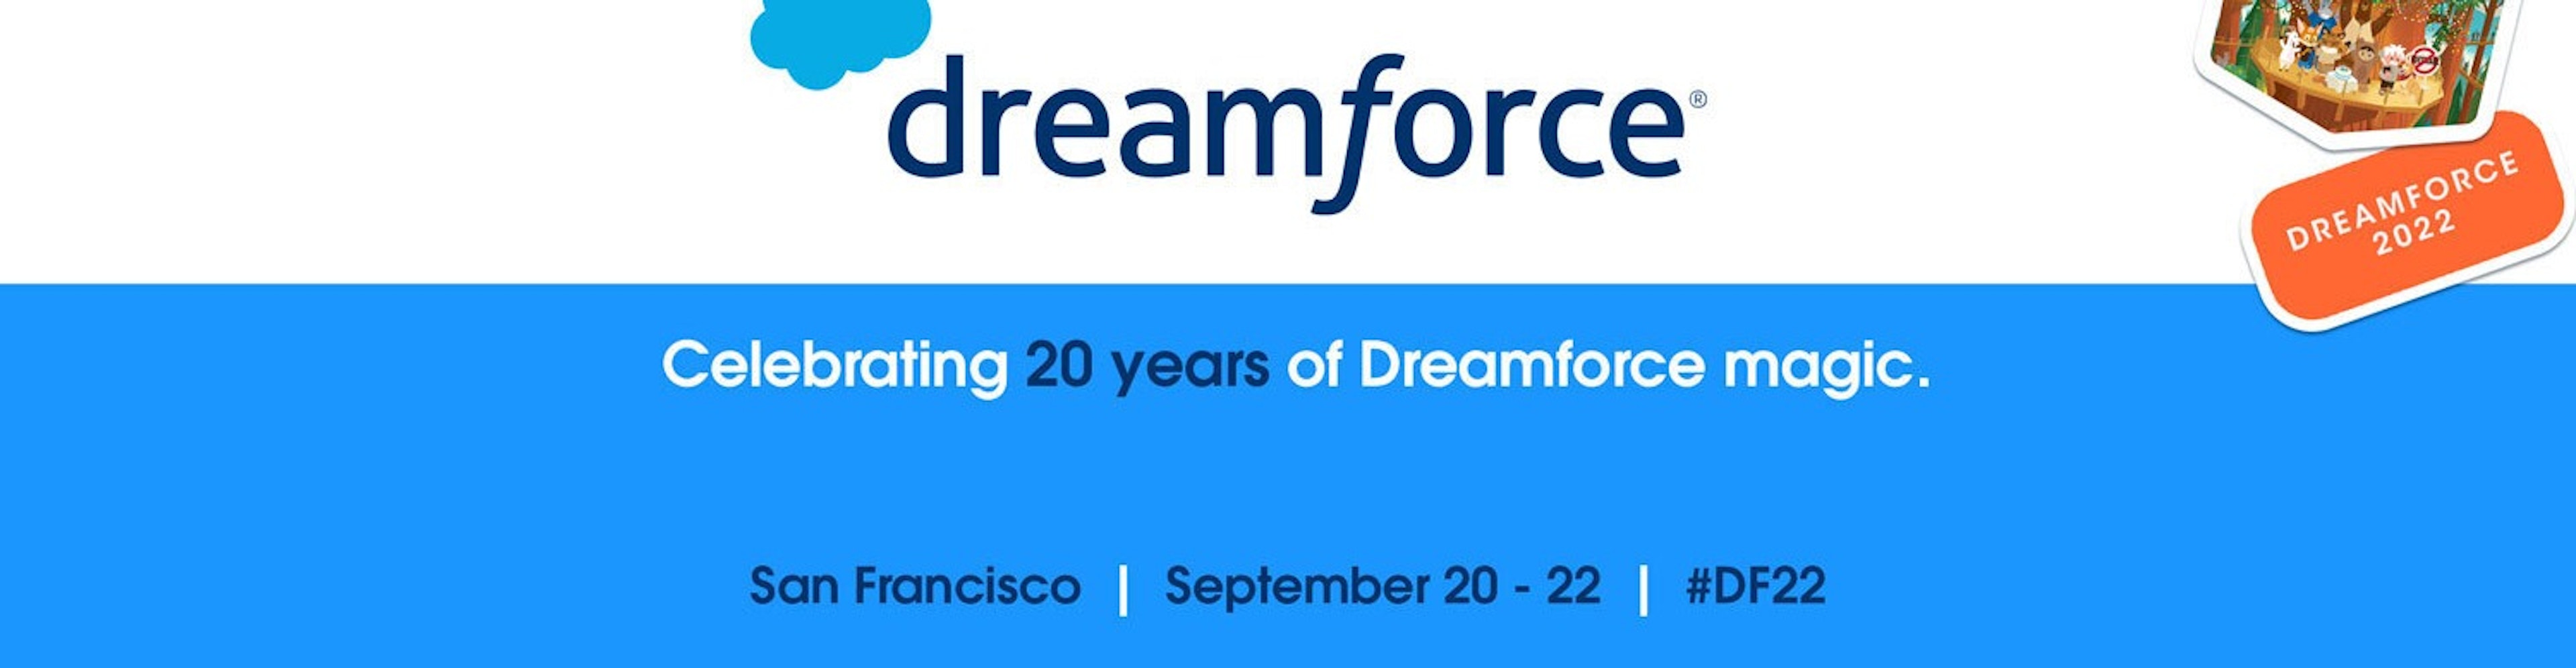 Cover image of dreamforce 2022